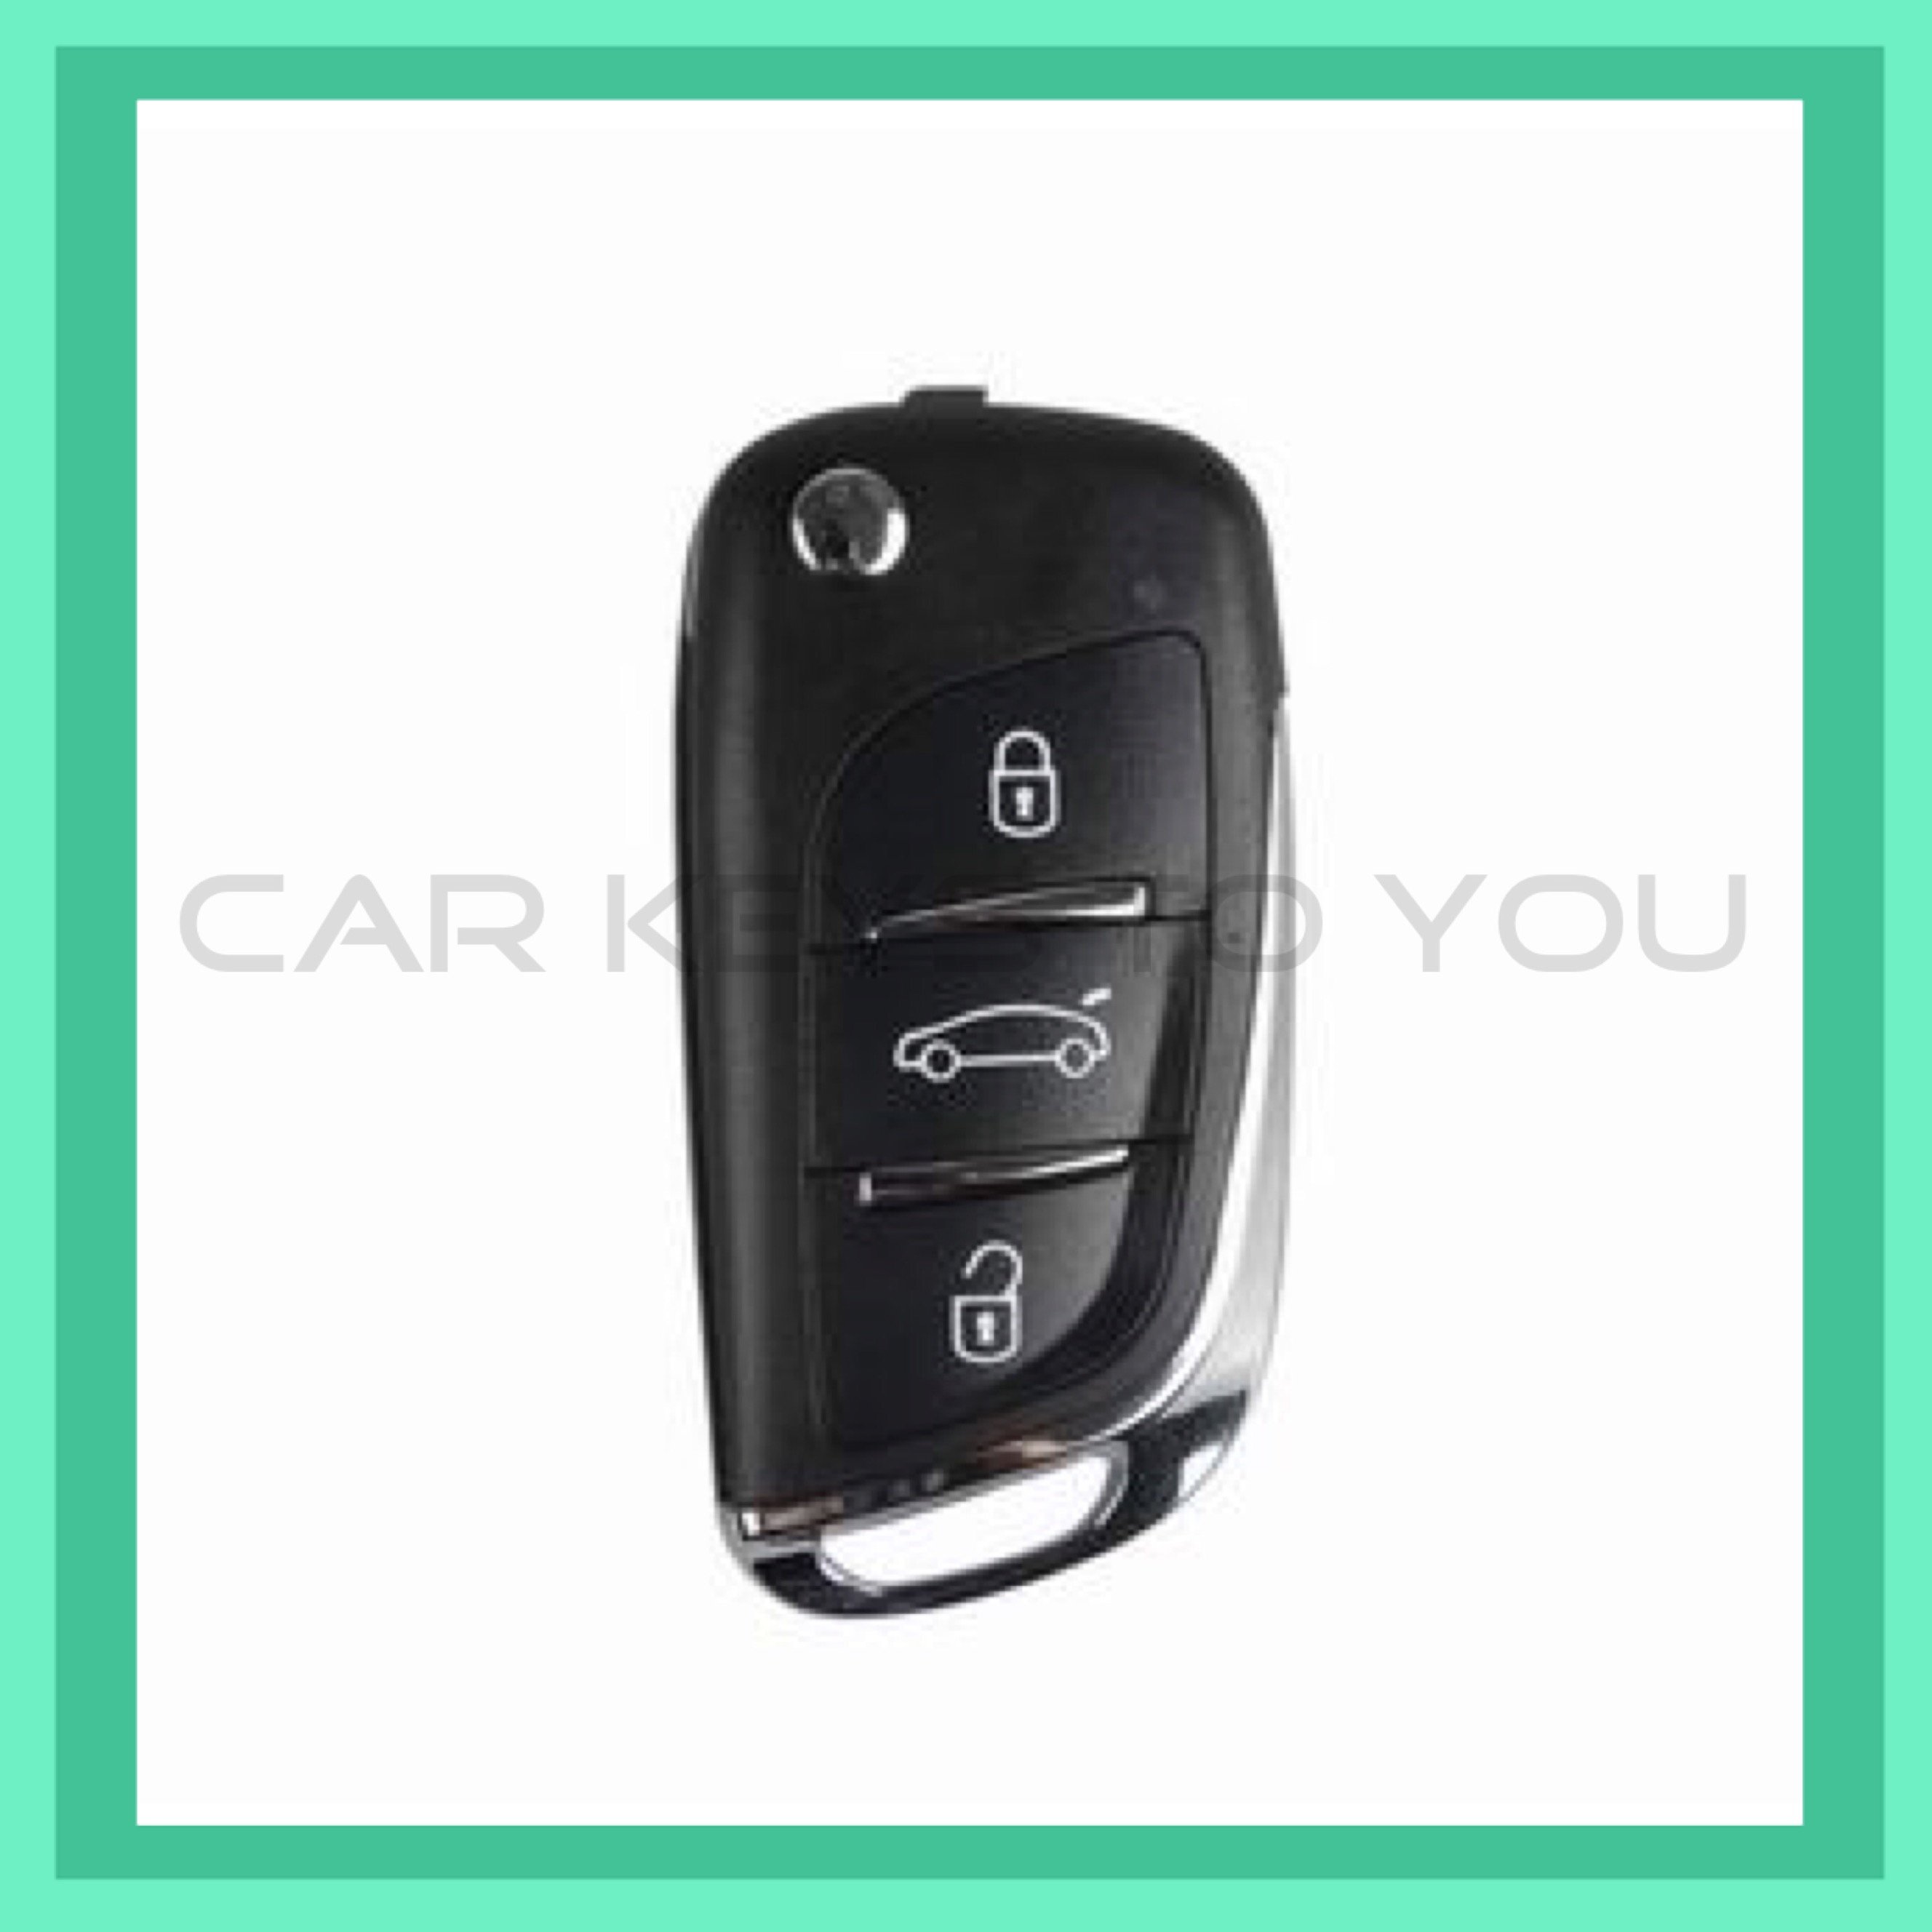 Toyota Rav 4 Car Key and Remote, Suit 2006 to 2007